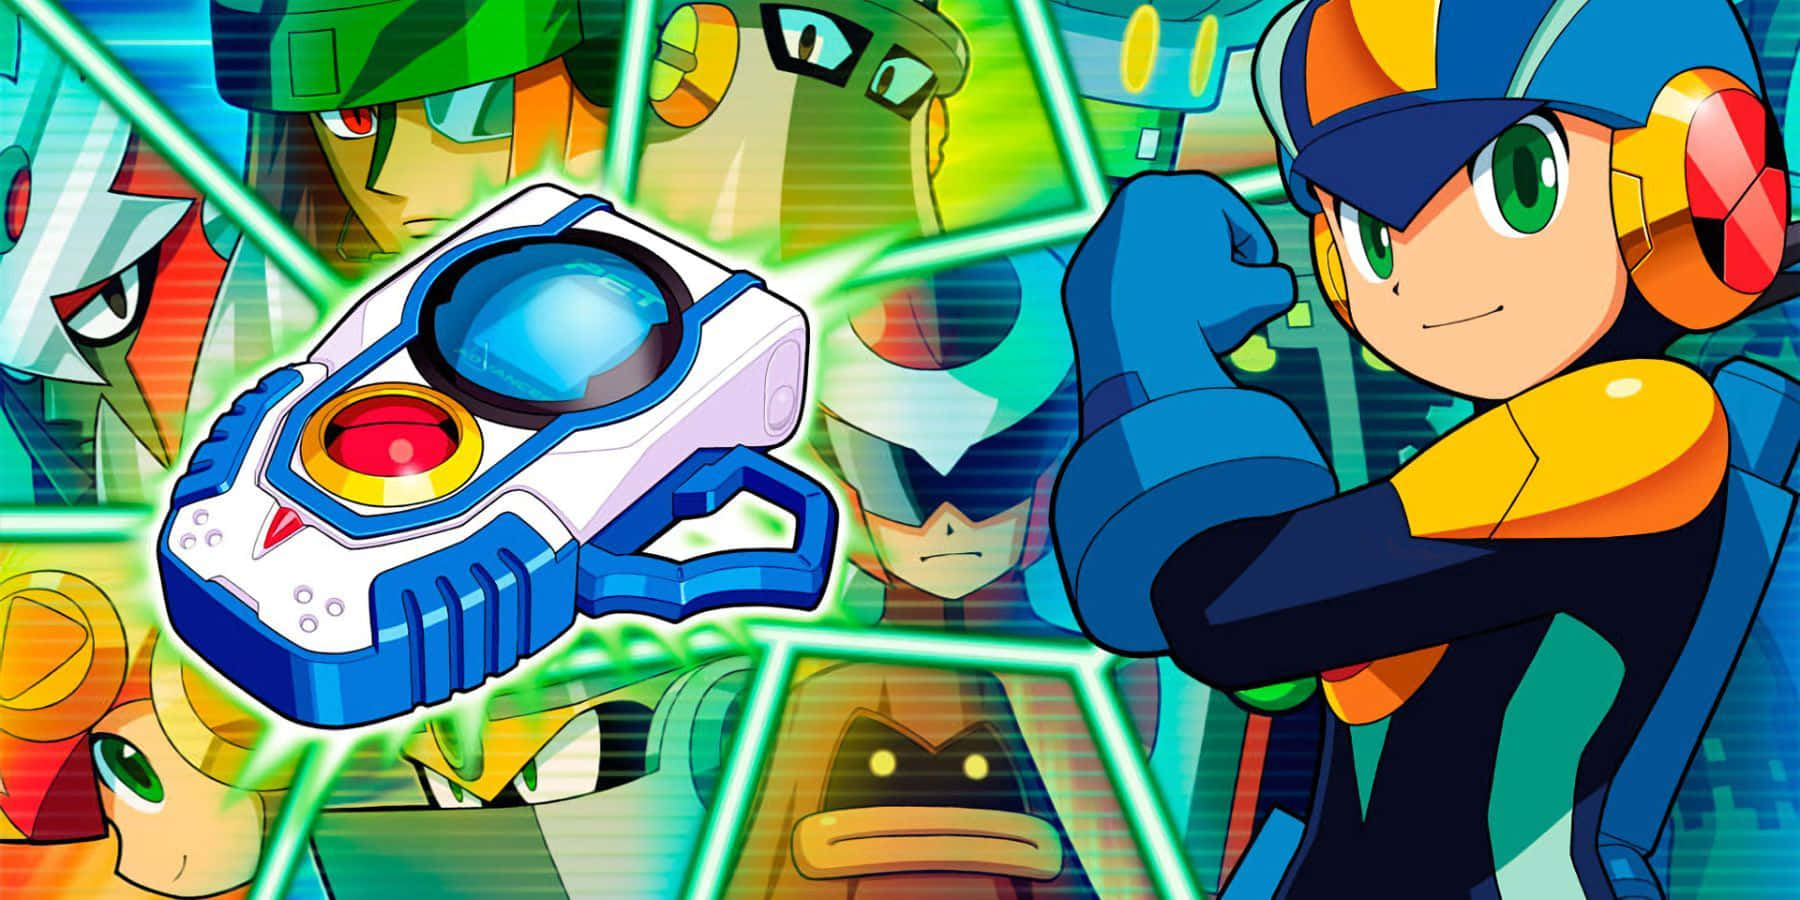 Megaman Hero locked and loaded in a digital universe.